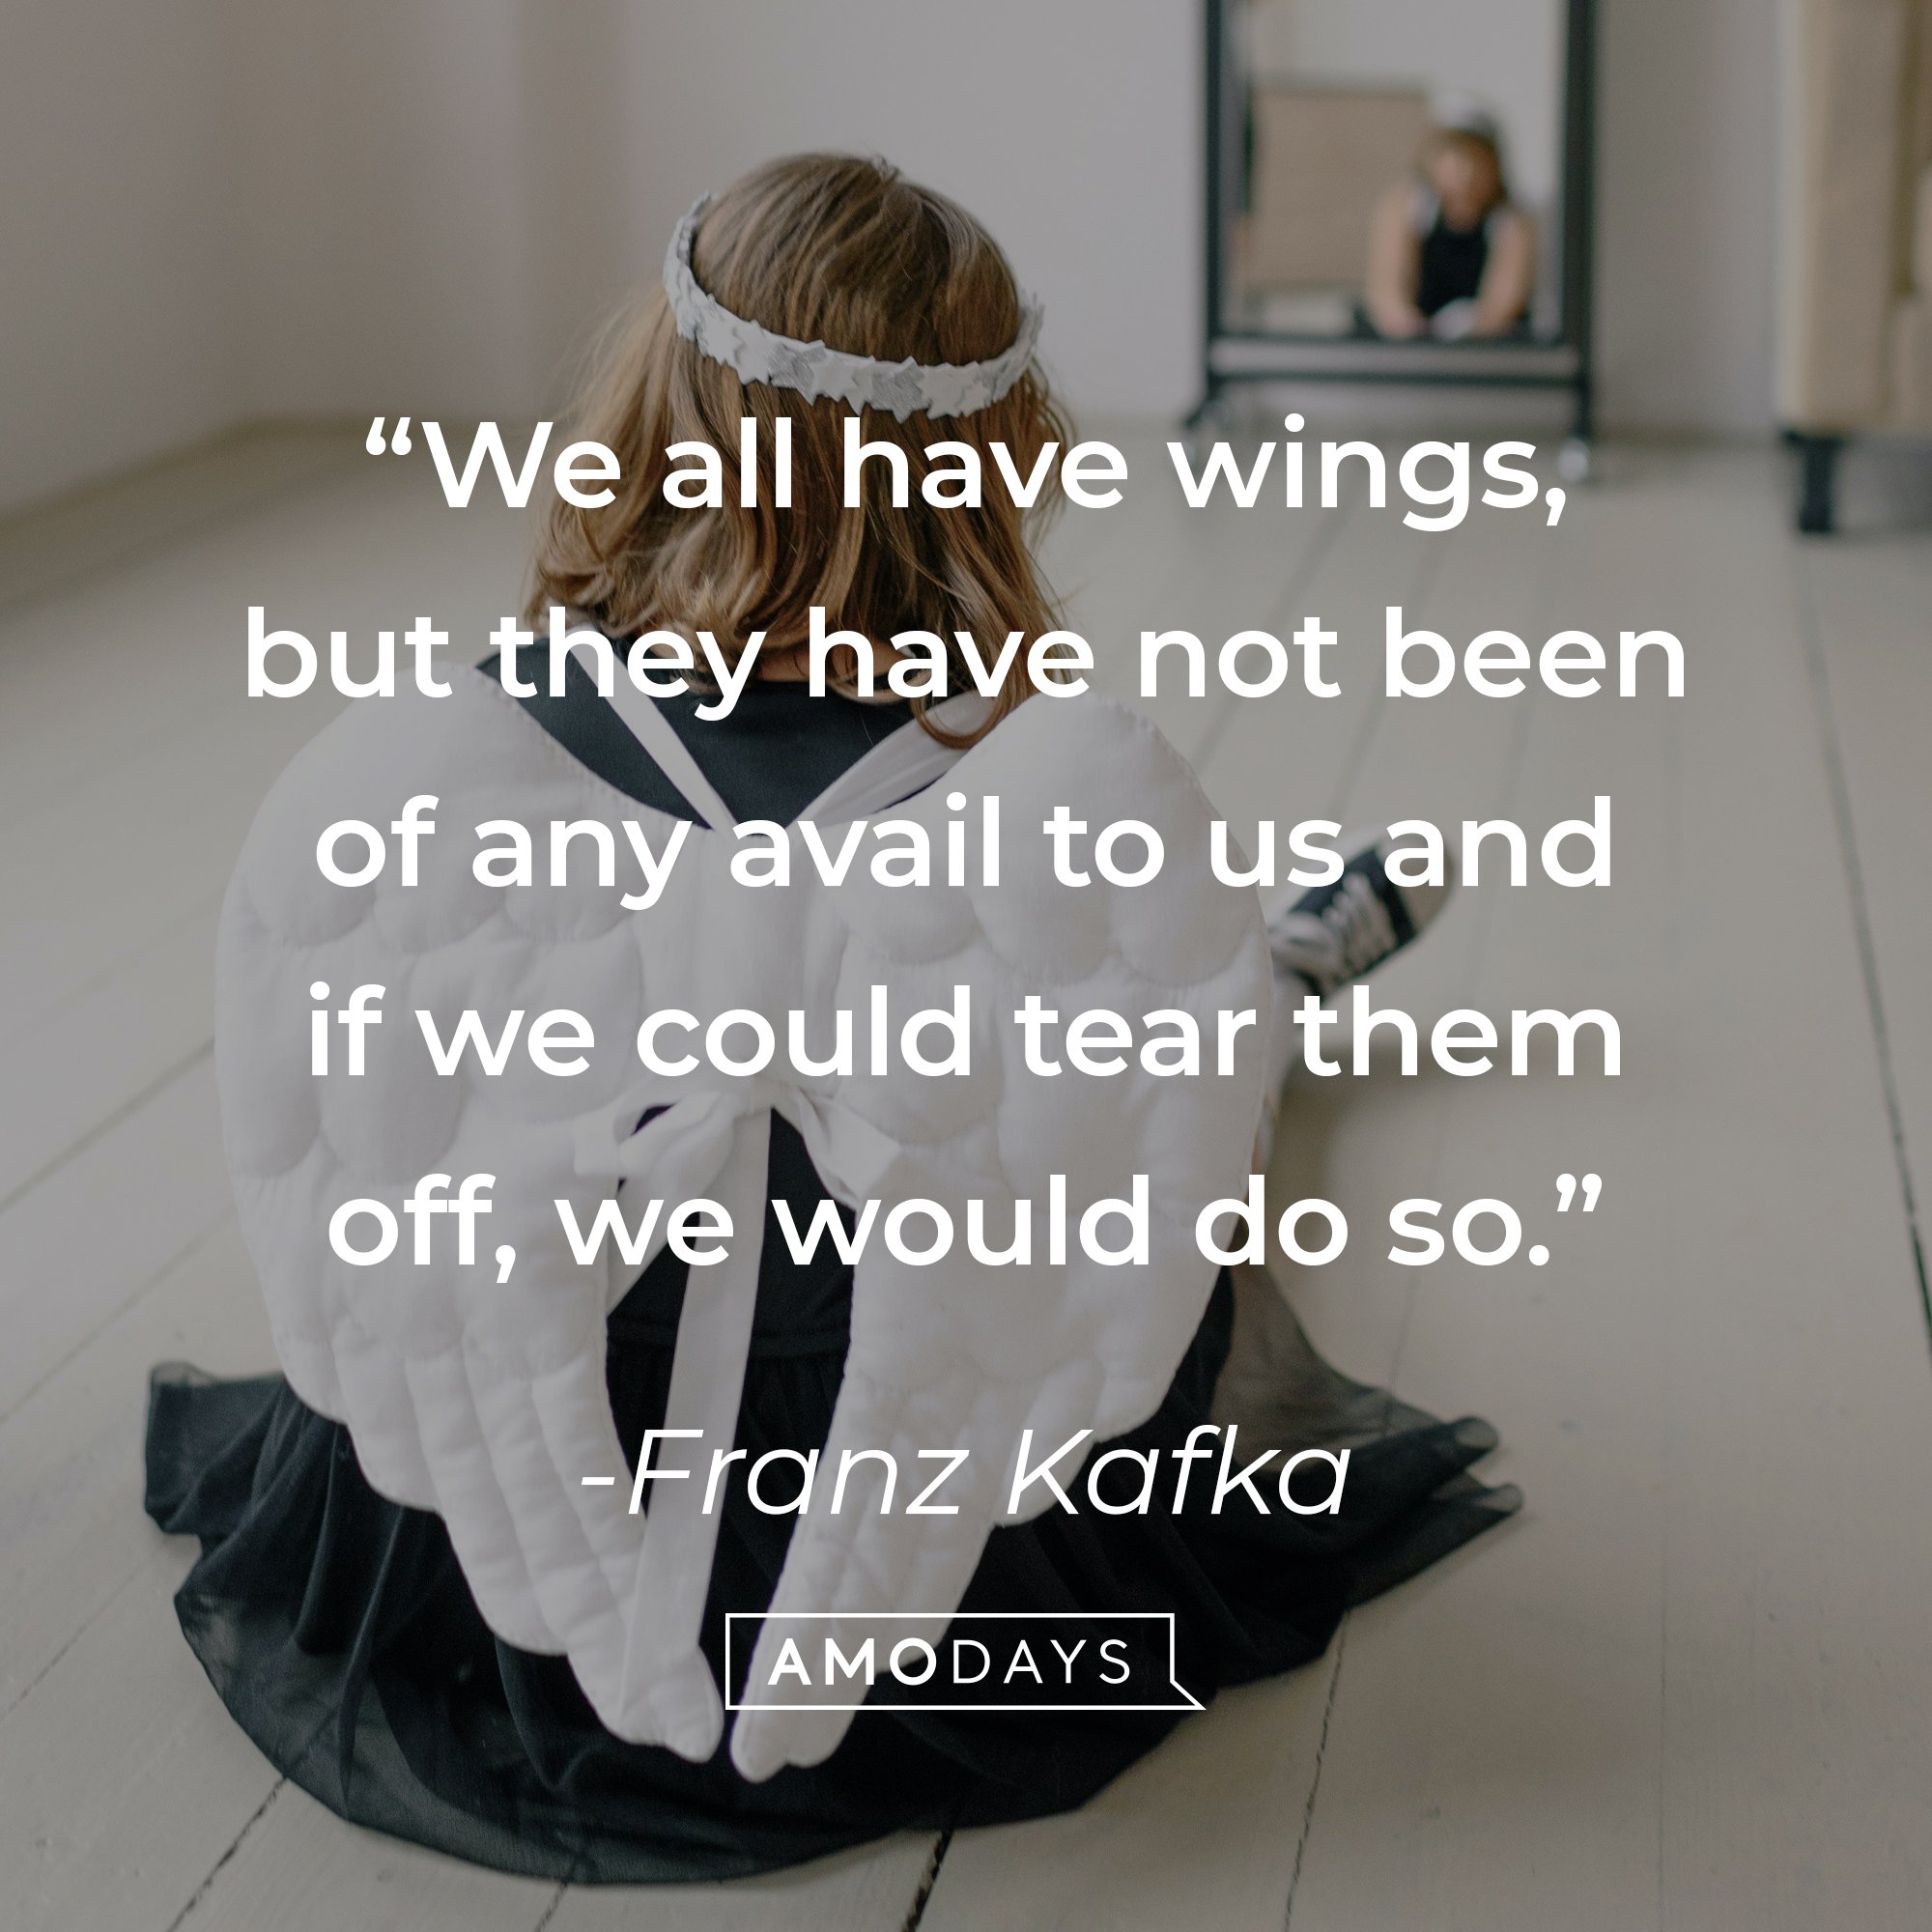 Franz Kafka's quote: "We all have wings, but they have not been of any avail to us and if we could tear them off, we would do so." | Image: AmoDays